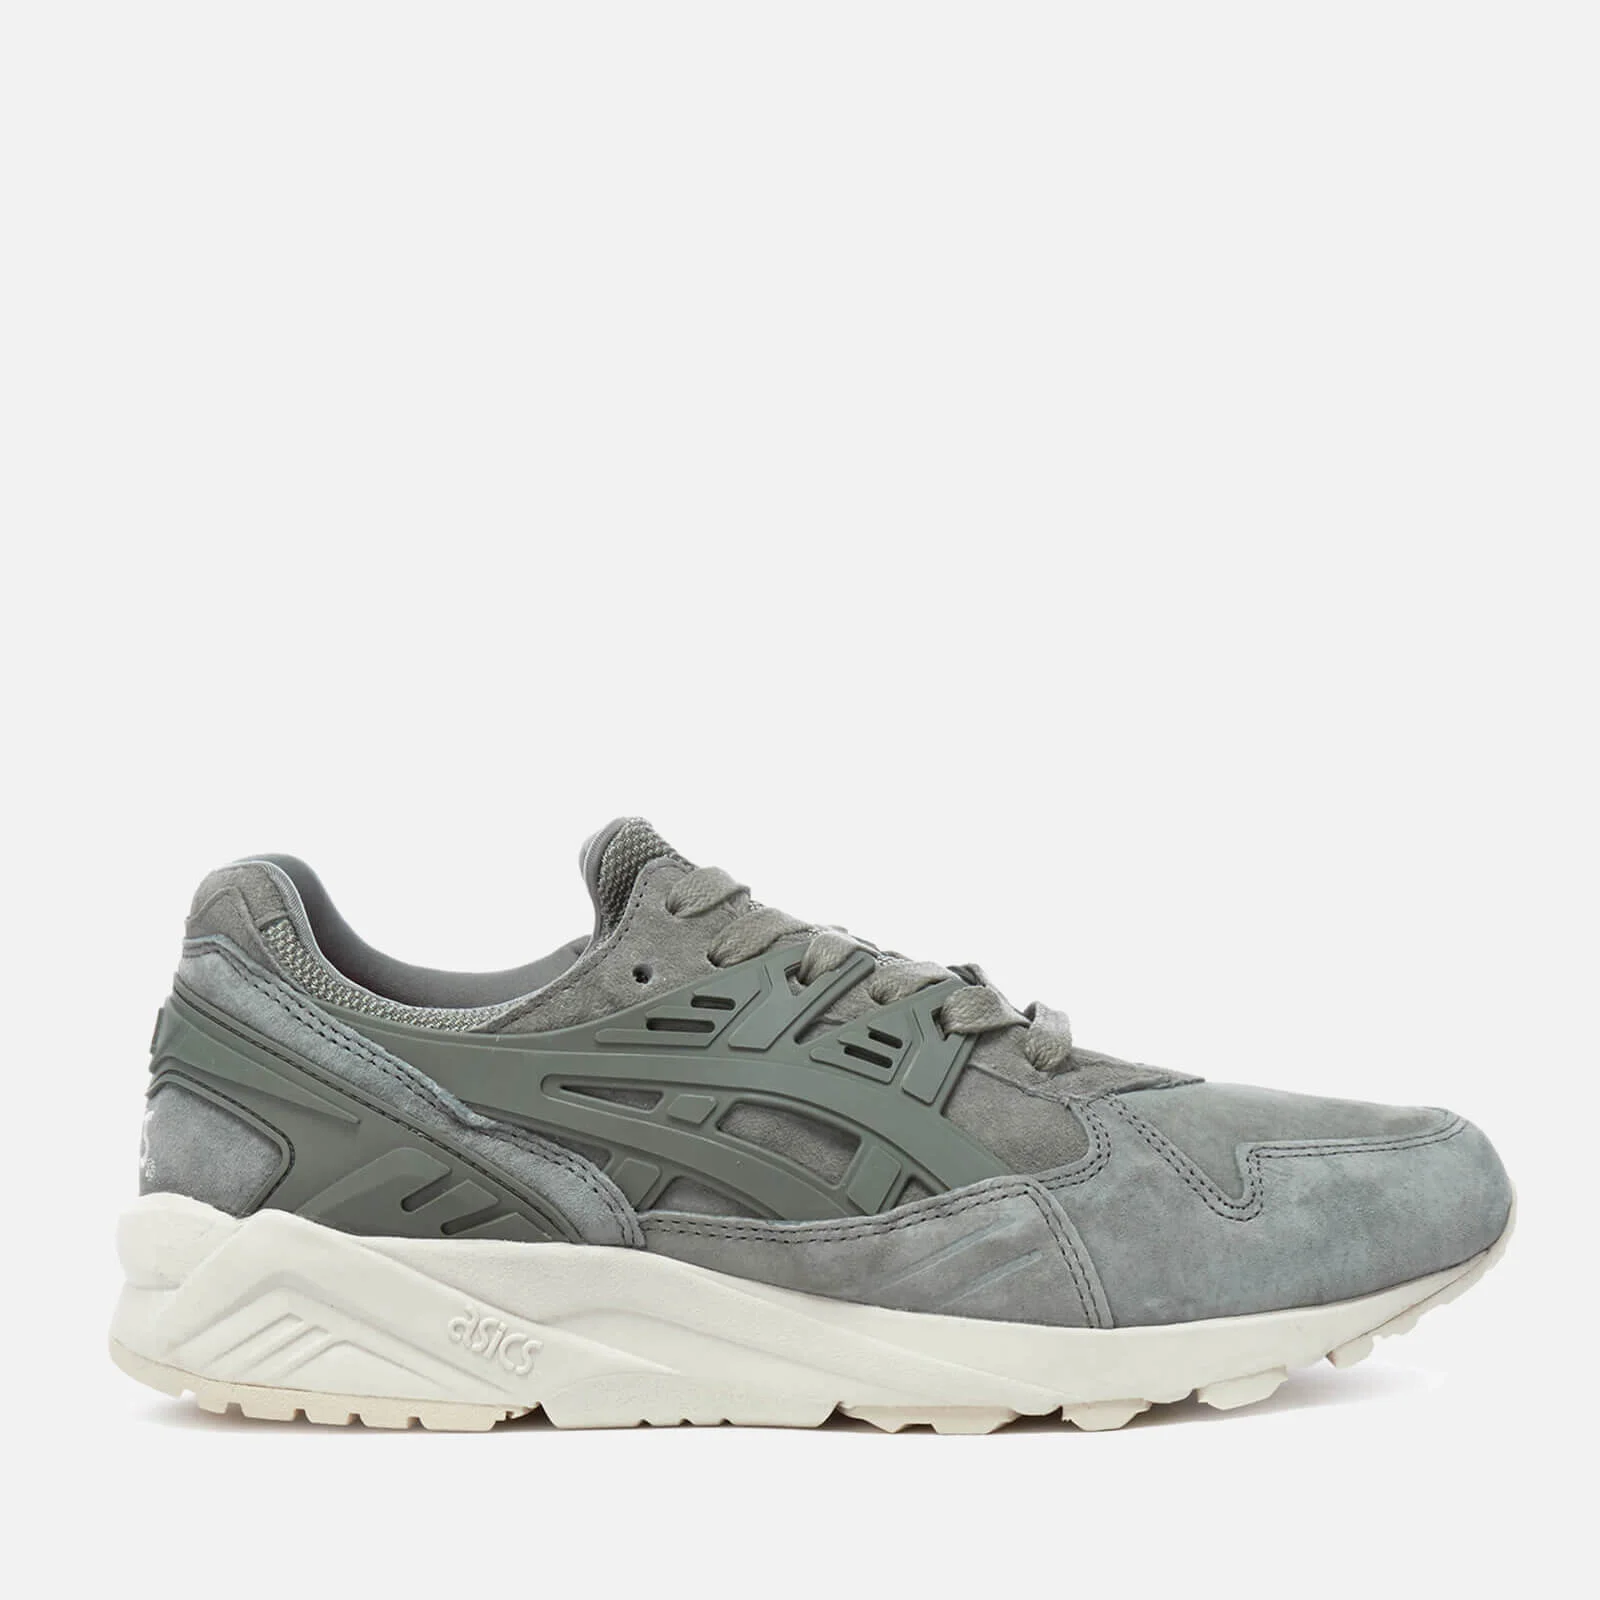 Asics Lifestyle Men's Gel-Kayano Trainers - Agave Green/Agave Green Image 1